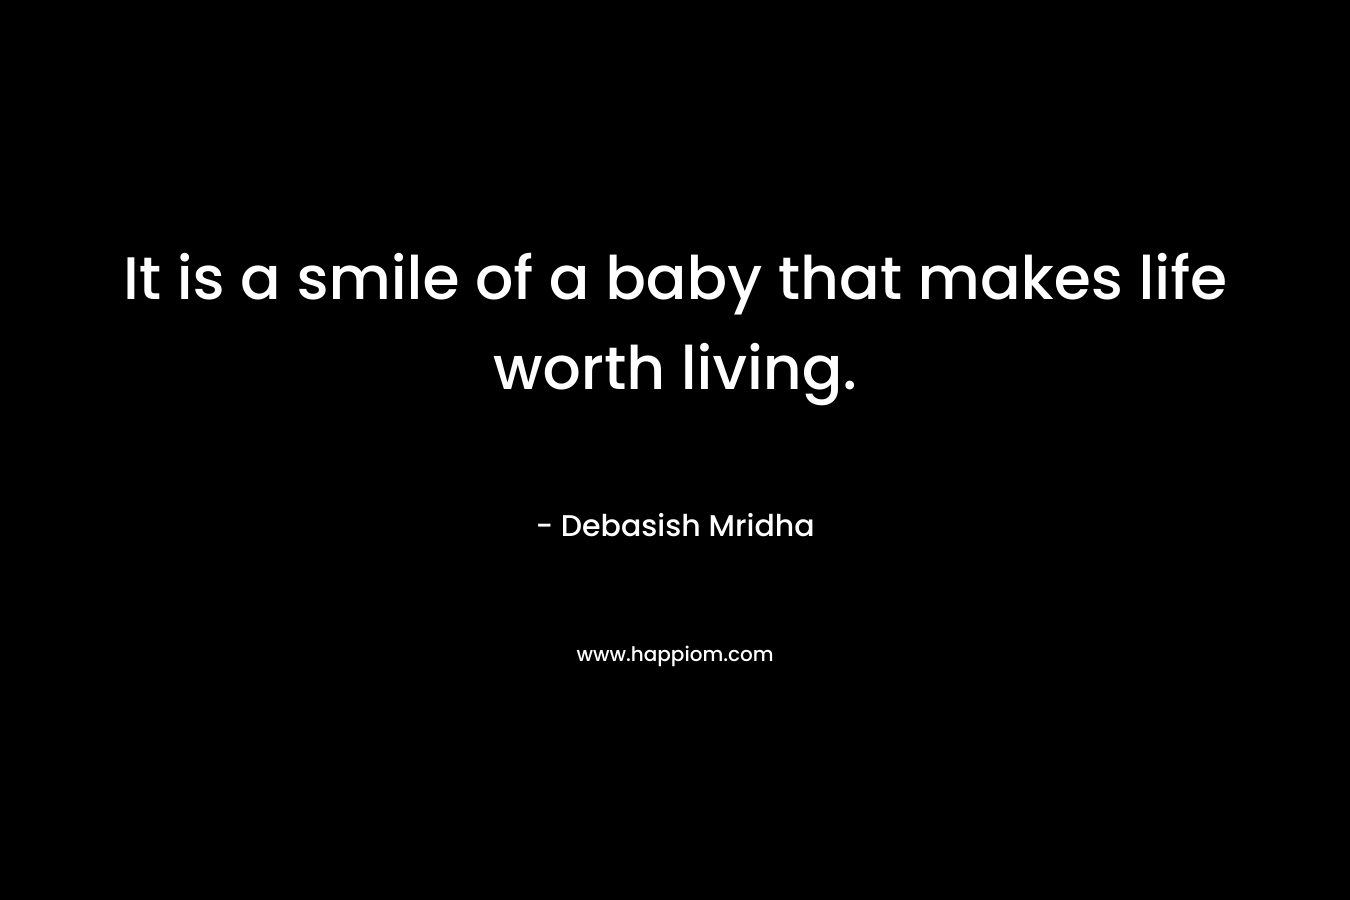 It is a smile of a baby that makes life worth living.